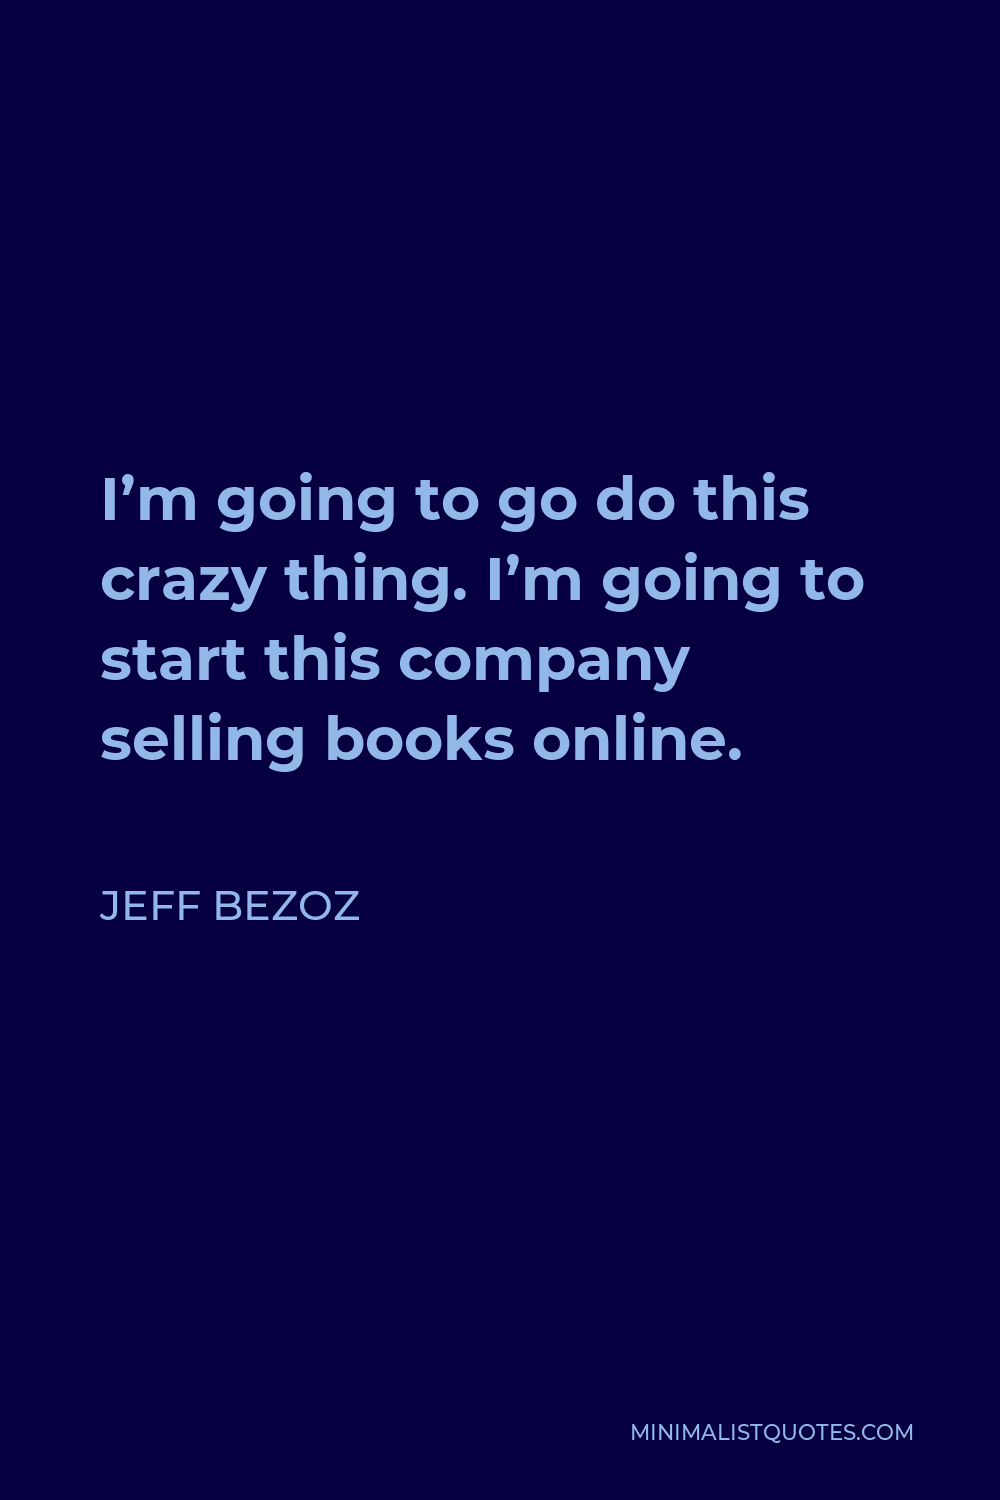 Jeff Bezoz Quote - I’m going to go do this crazy thing. I’m going to start this company selling books online.